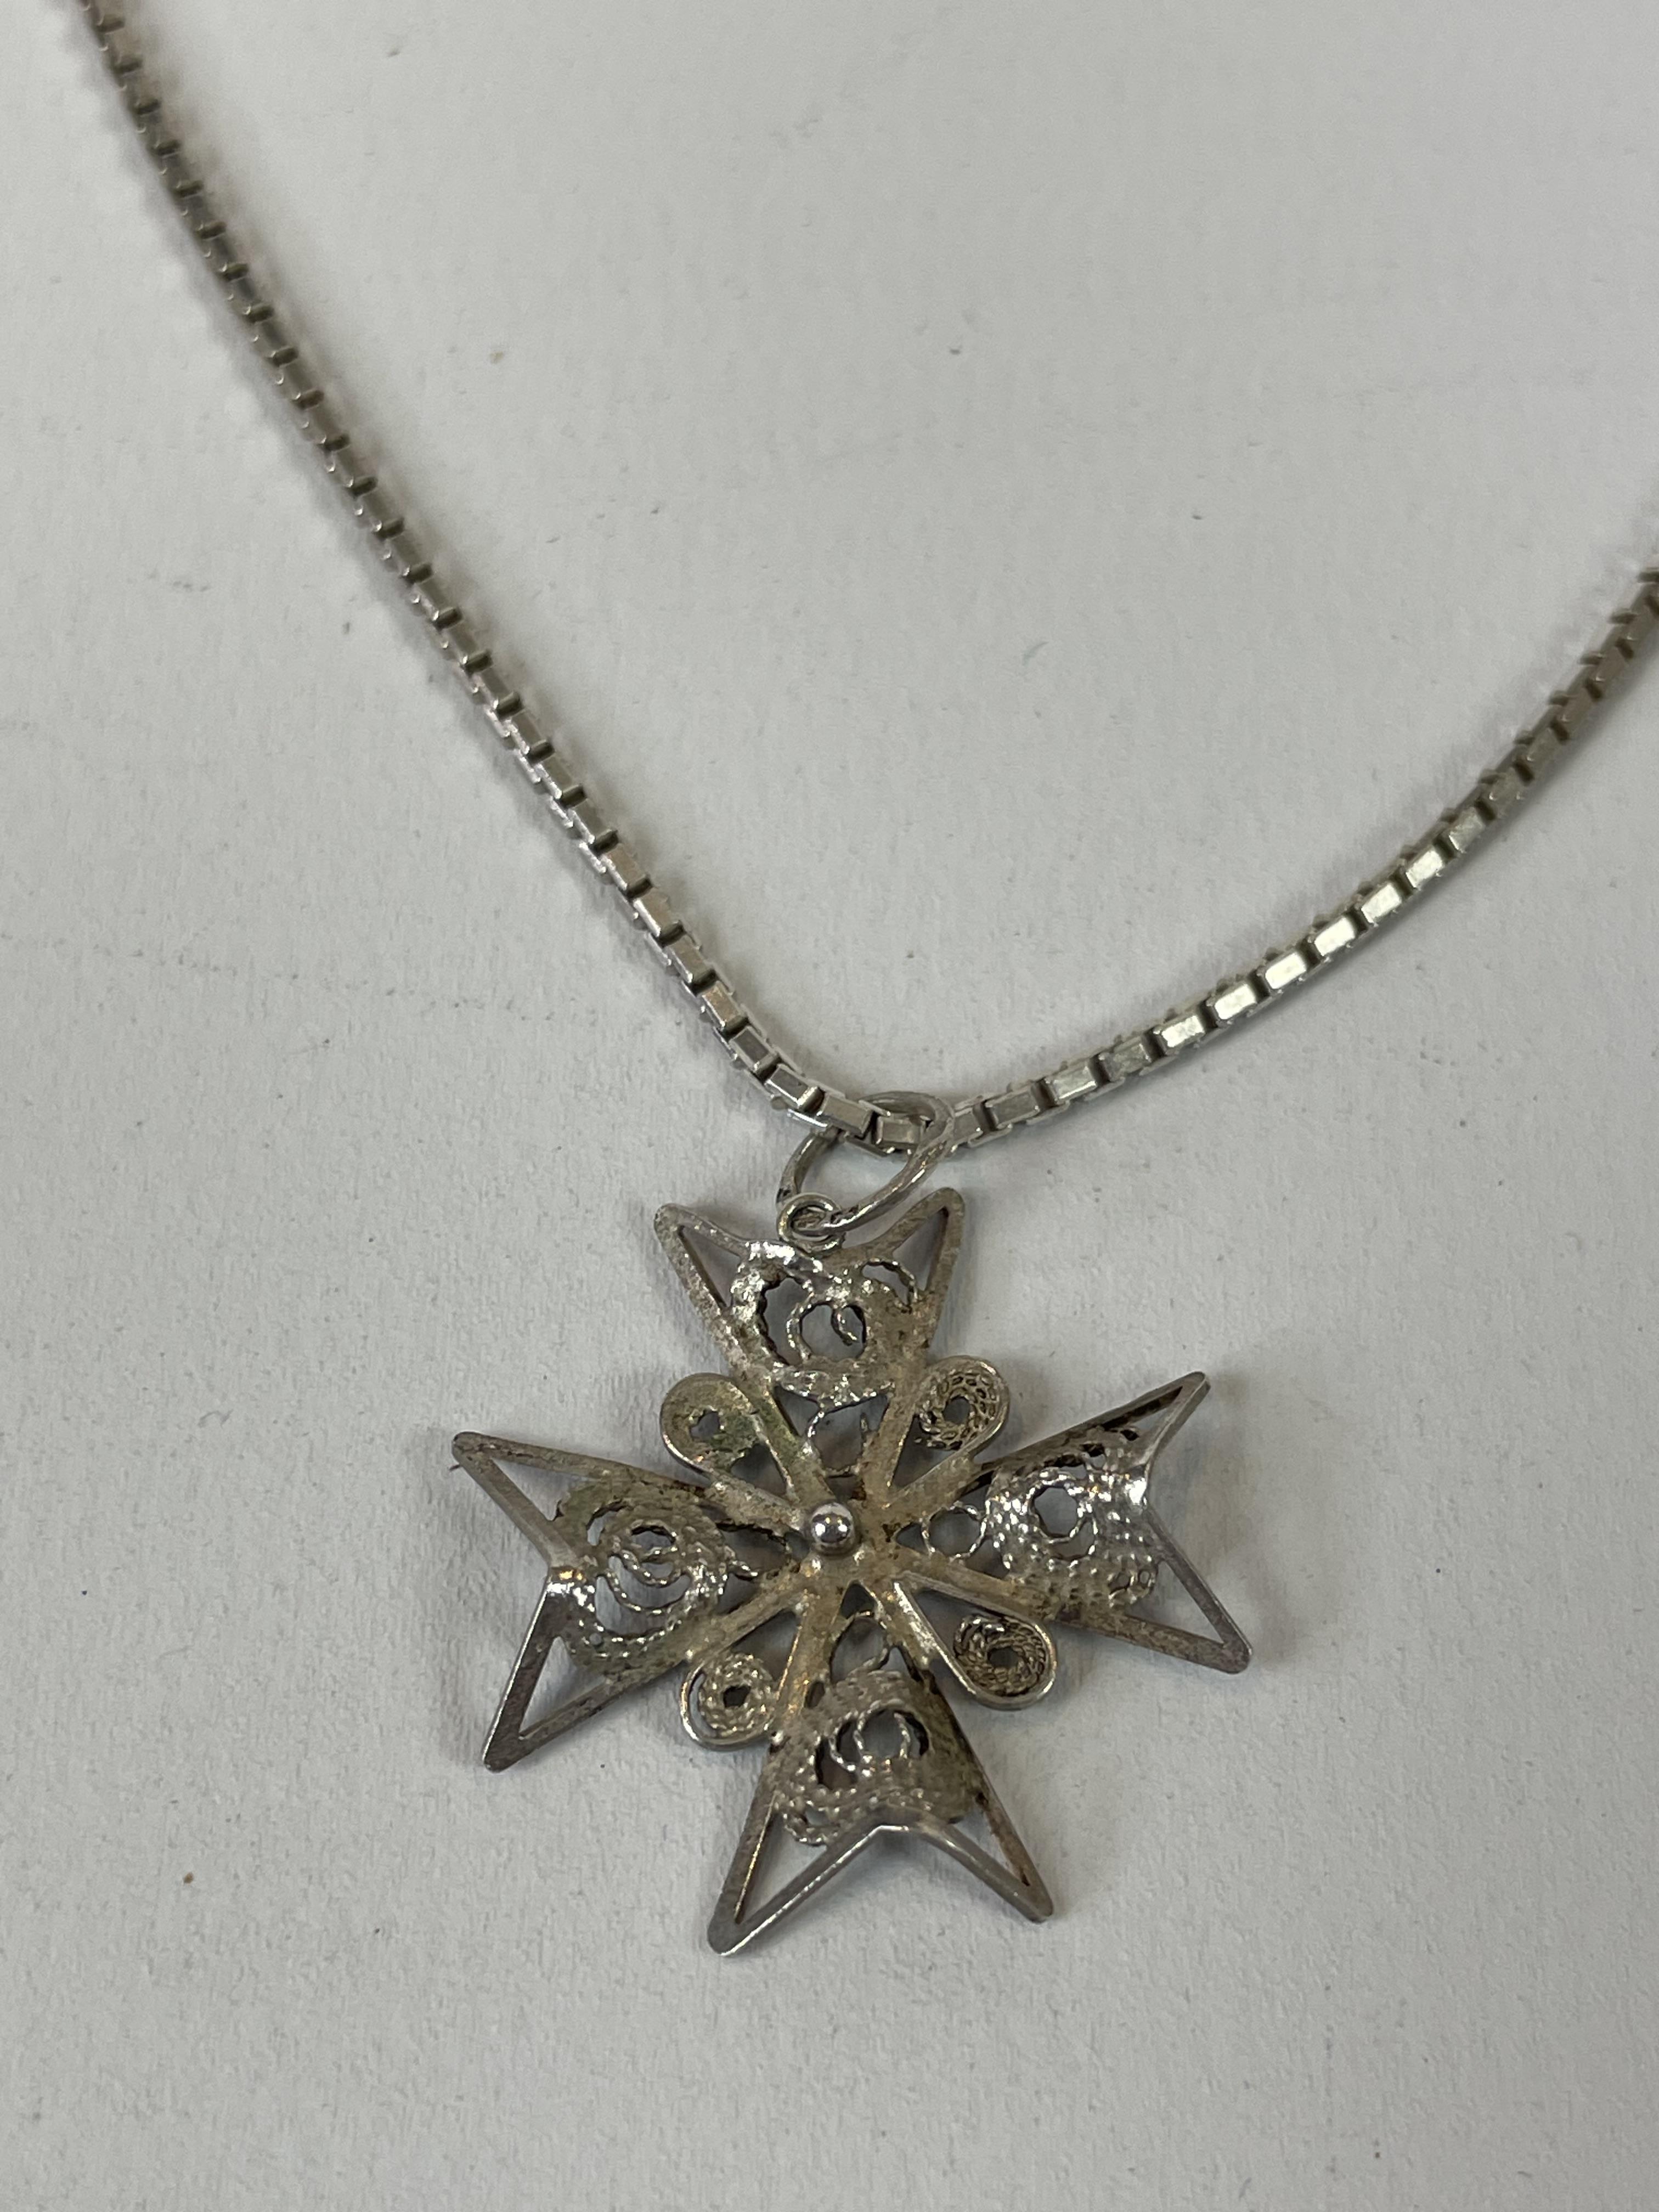 Silver necklace with filigreecross pendant - Image 2 of 2